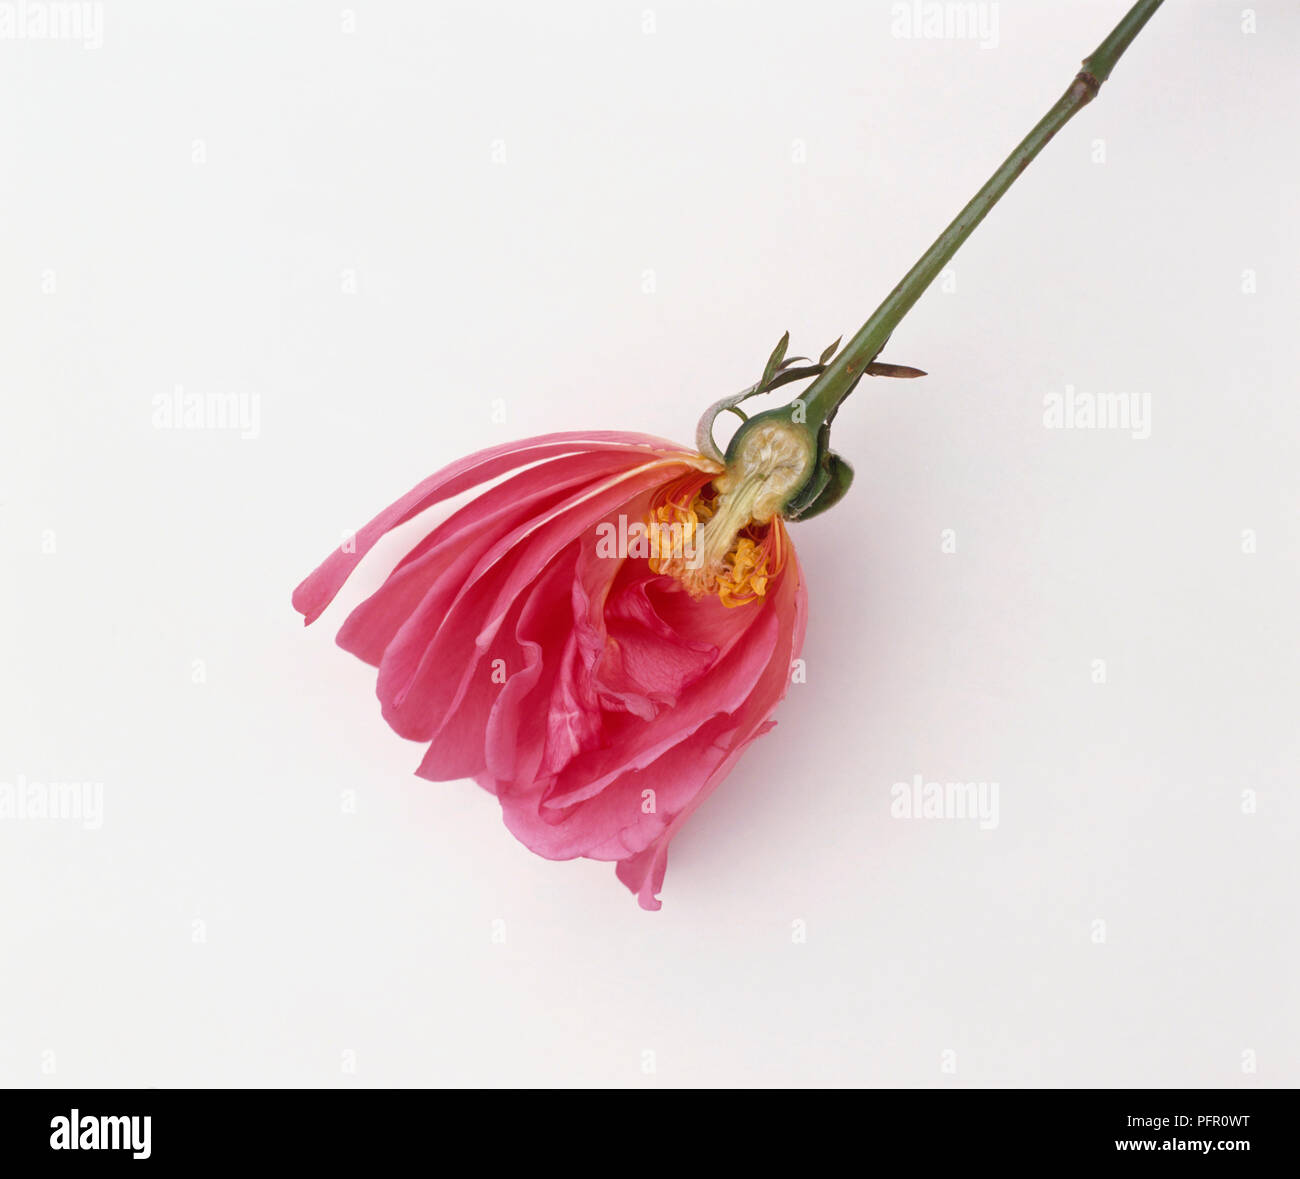 Cross-section through flower showing reproductive structure Stock Photo